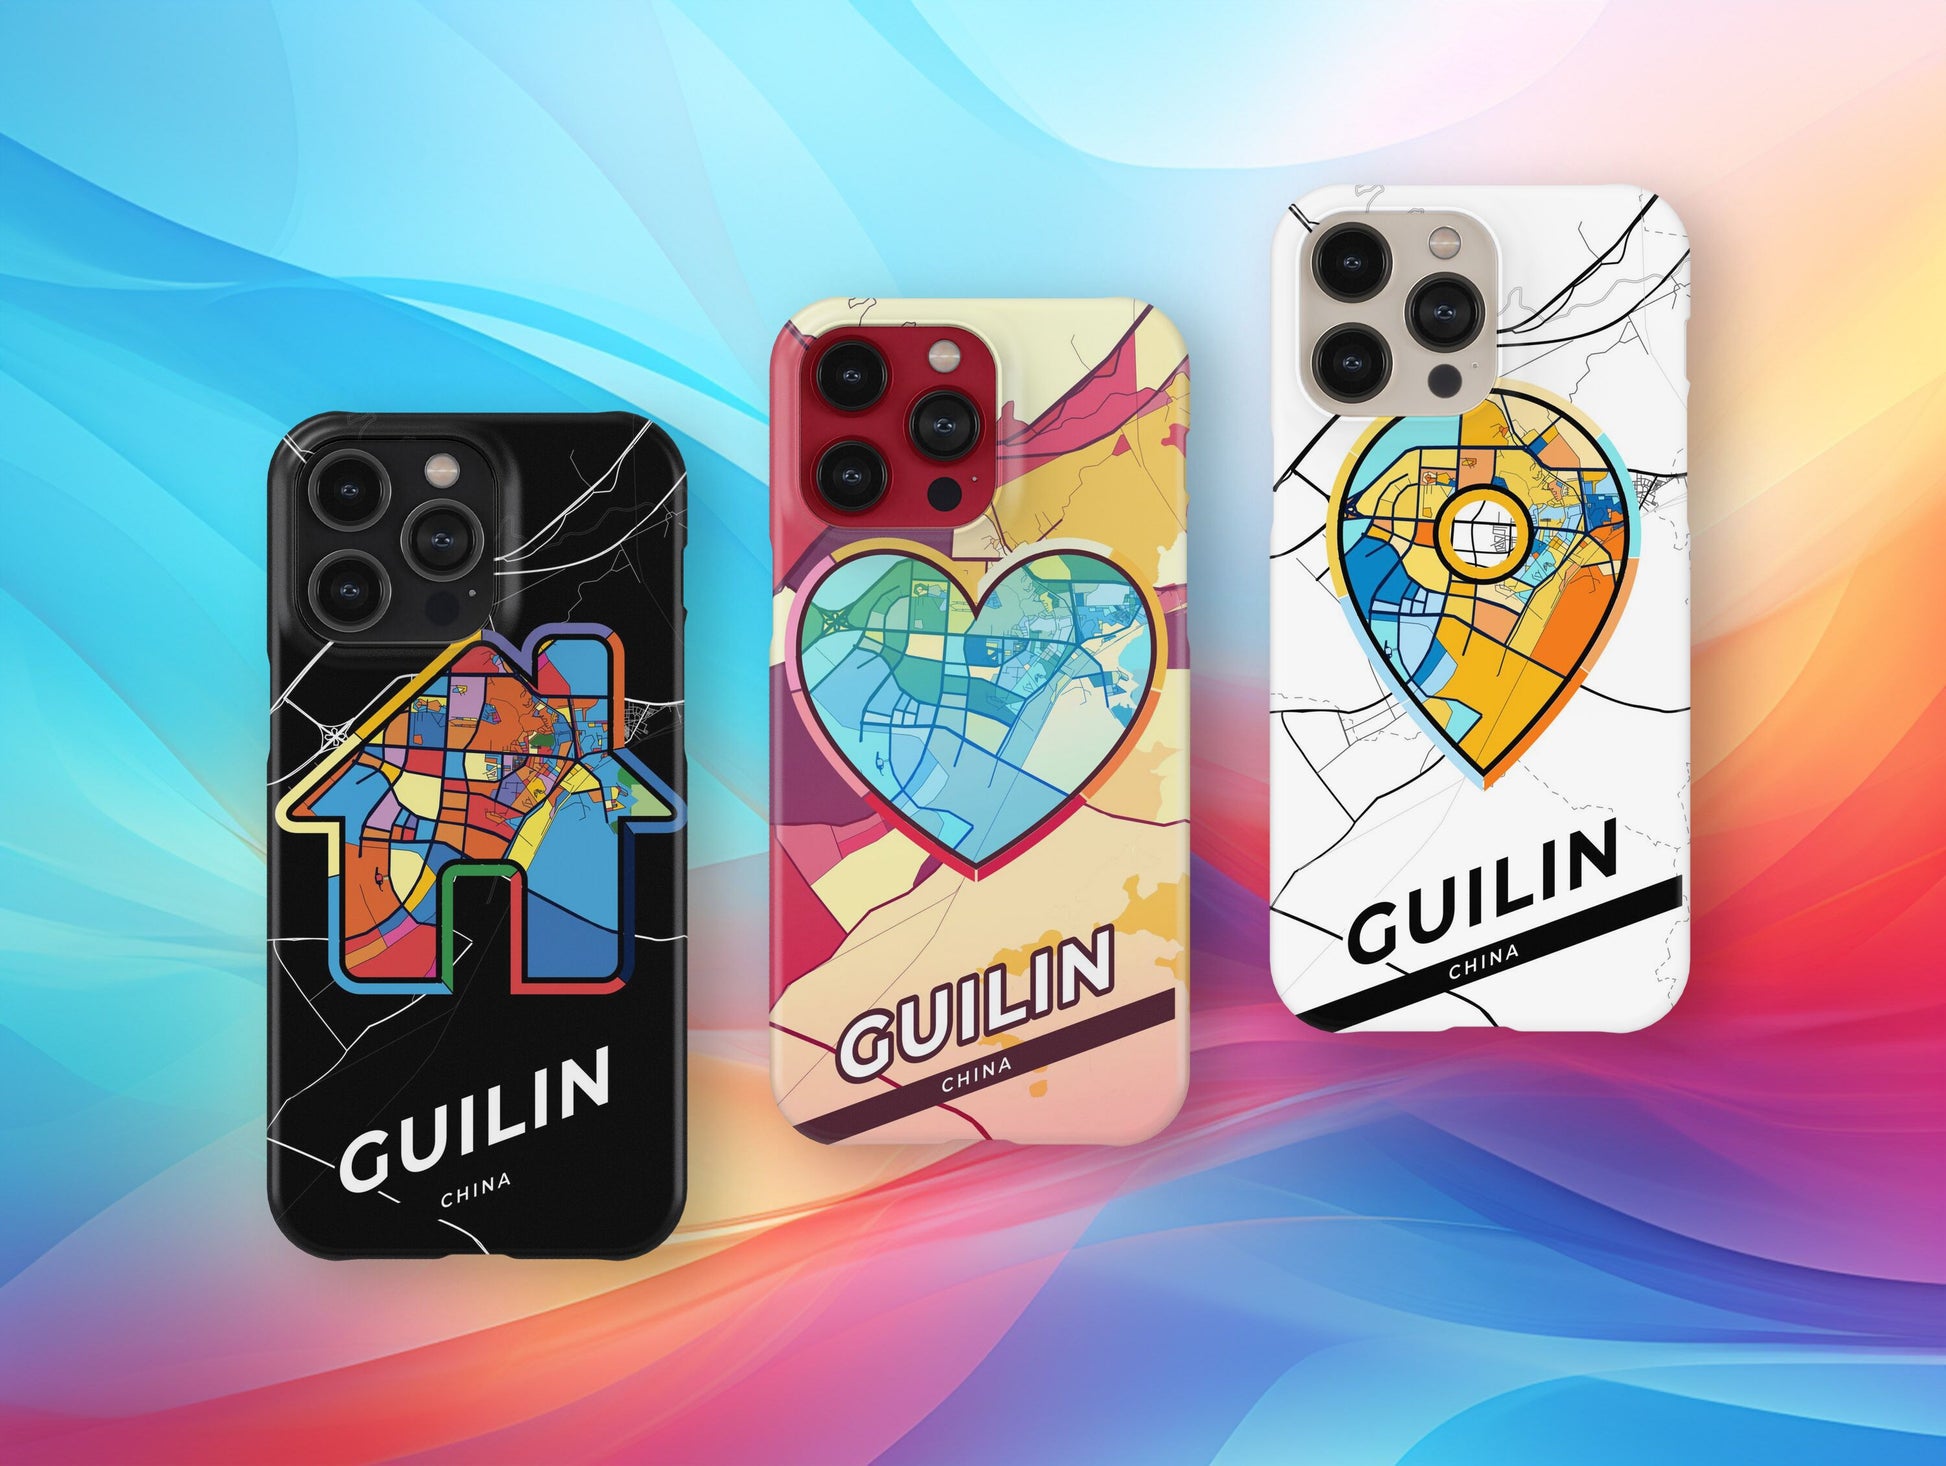 Guilin China slim phone case with colorful icon. Birthday, wedding or housewarming gift. Couple match cases.